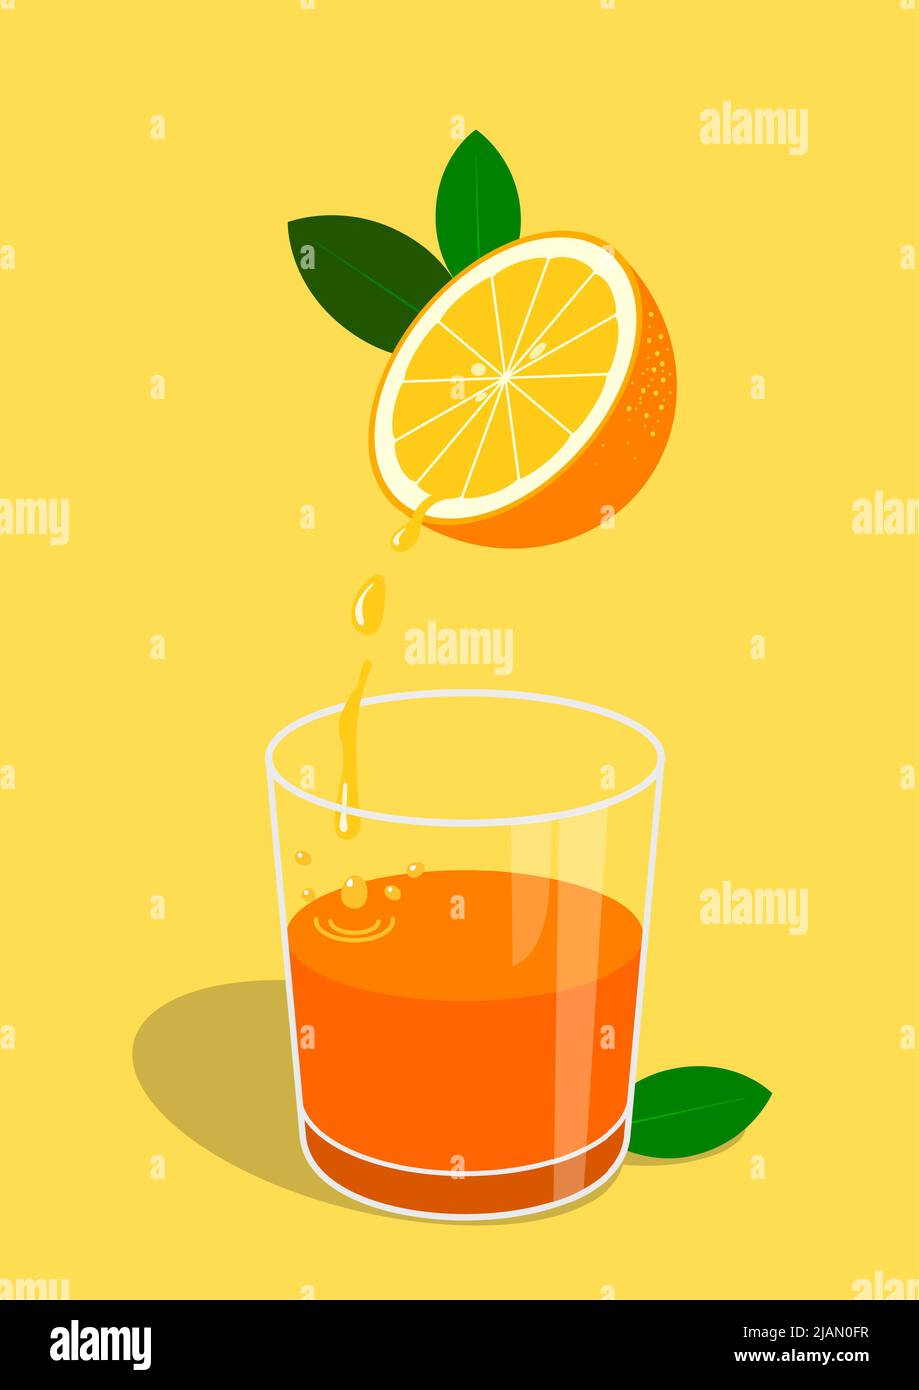 Healthy illustration of a half orange from which the juice flows into a glass underneath. Flat and vivid colors. Cool and fun Stock Vector